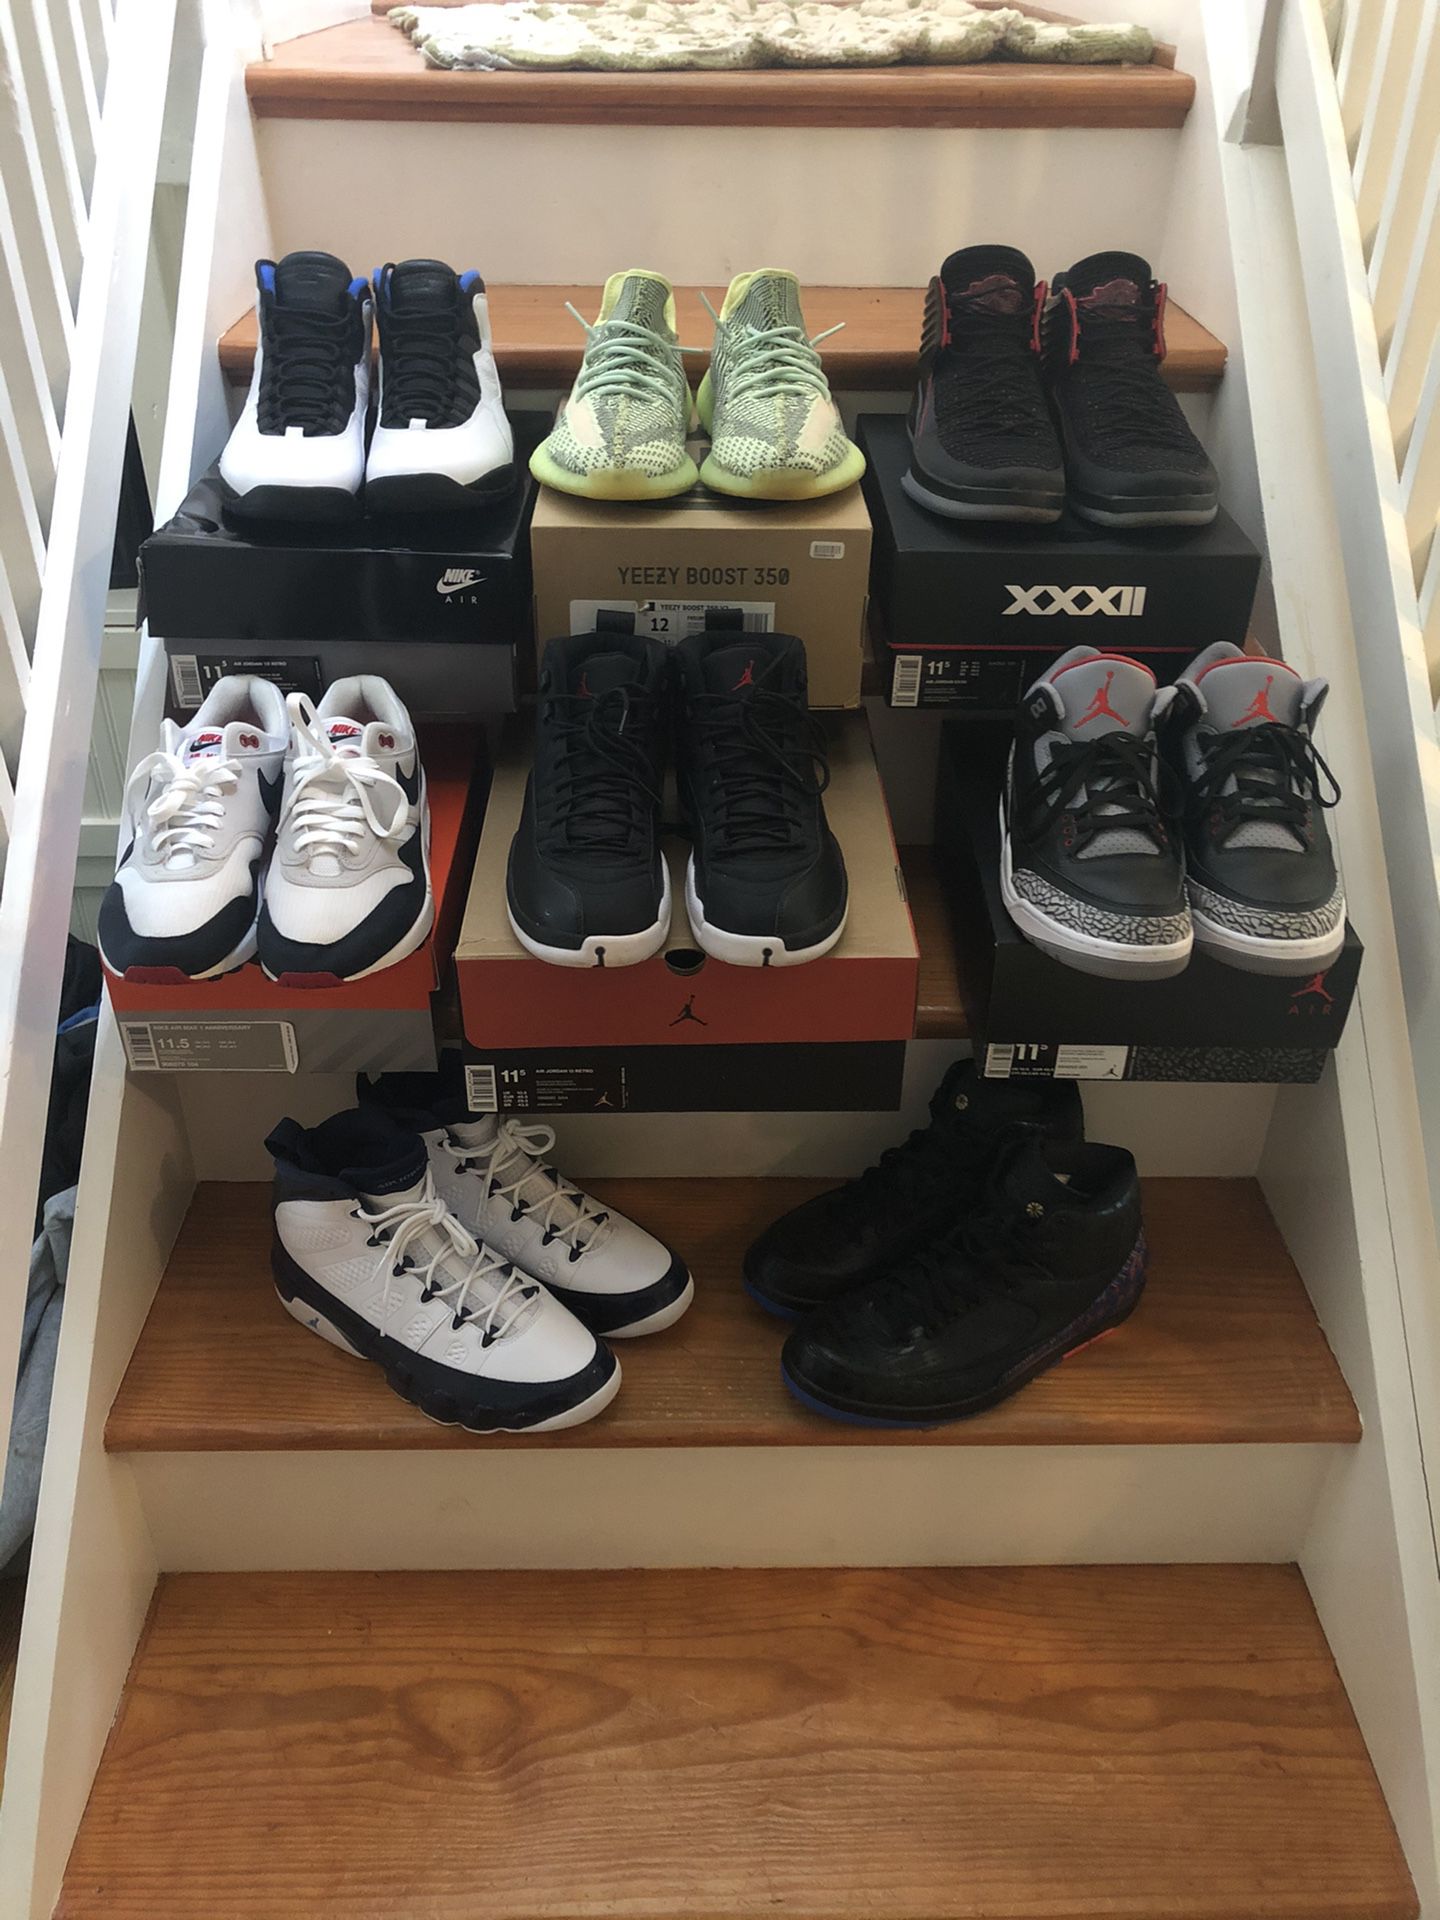 Jordan’s and Yeezys (Size 11-12) PRICES IN DESCRIPTION